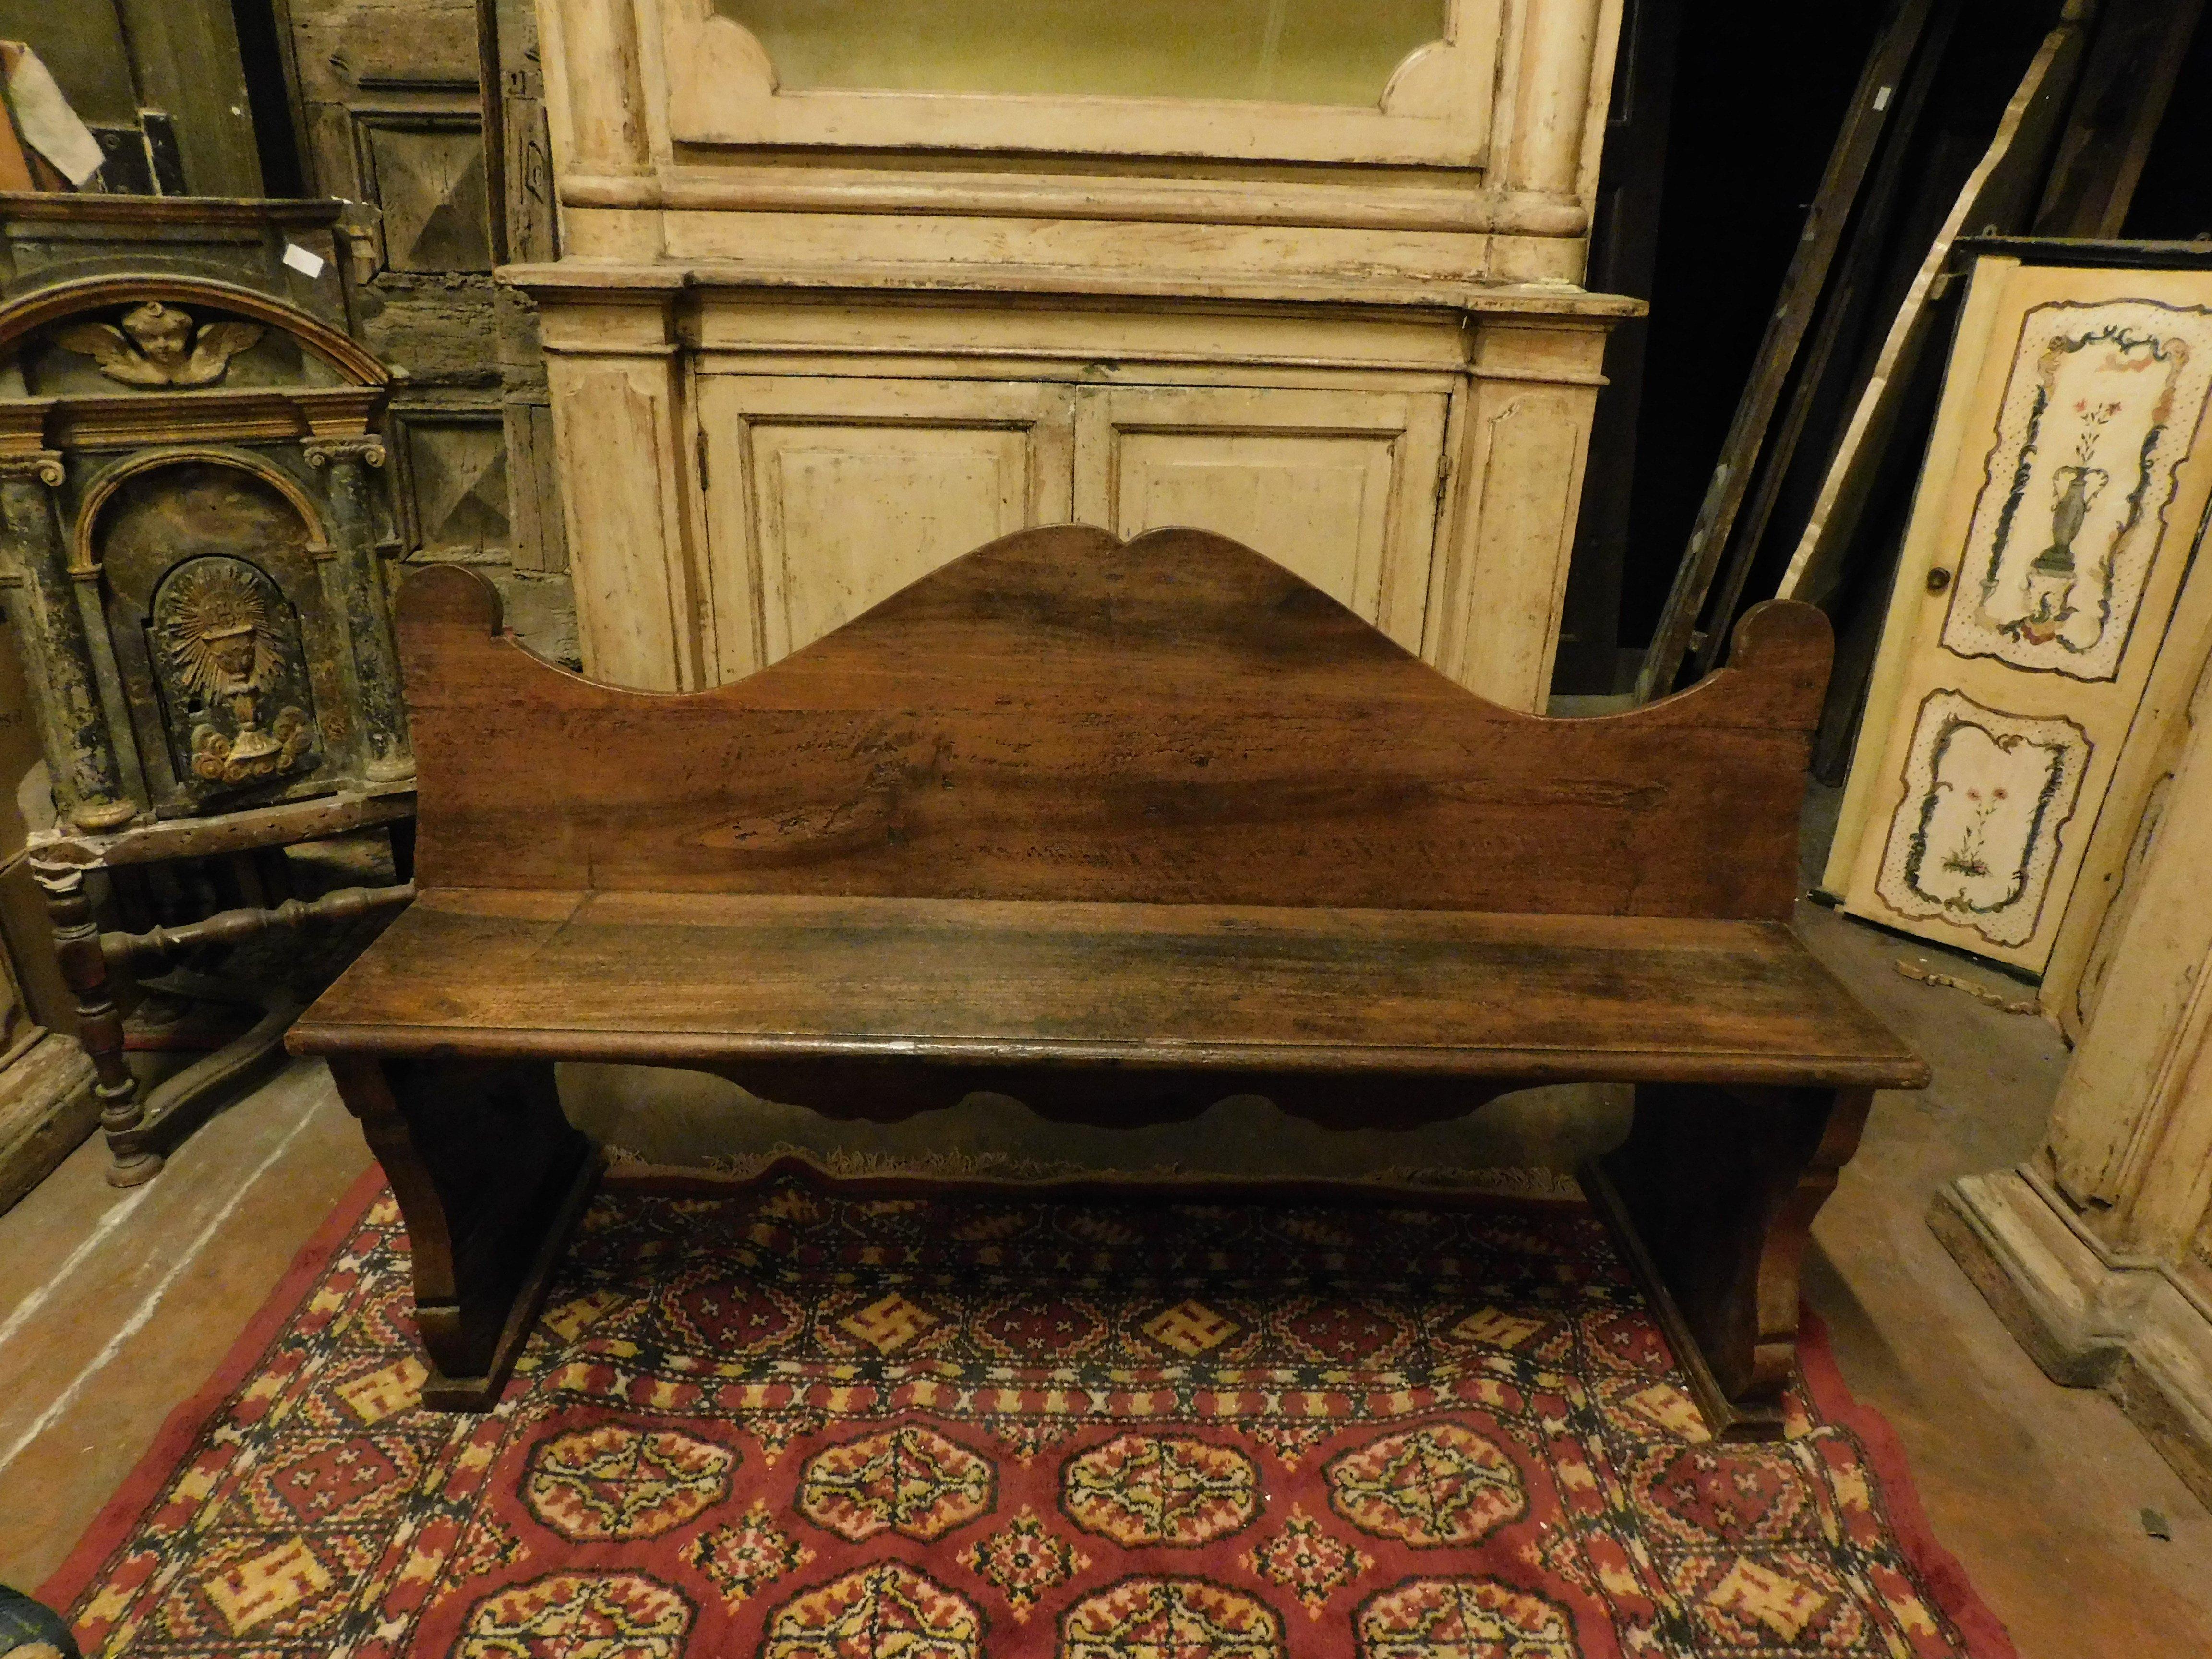 old vintage bench in solid walnut wood, carved with a wavy shape, originating from Piedmont (Italy), original from the 18th century, measuring cm w 145 x h 85 (seat h 50) x d 45.